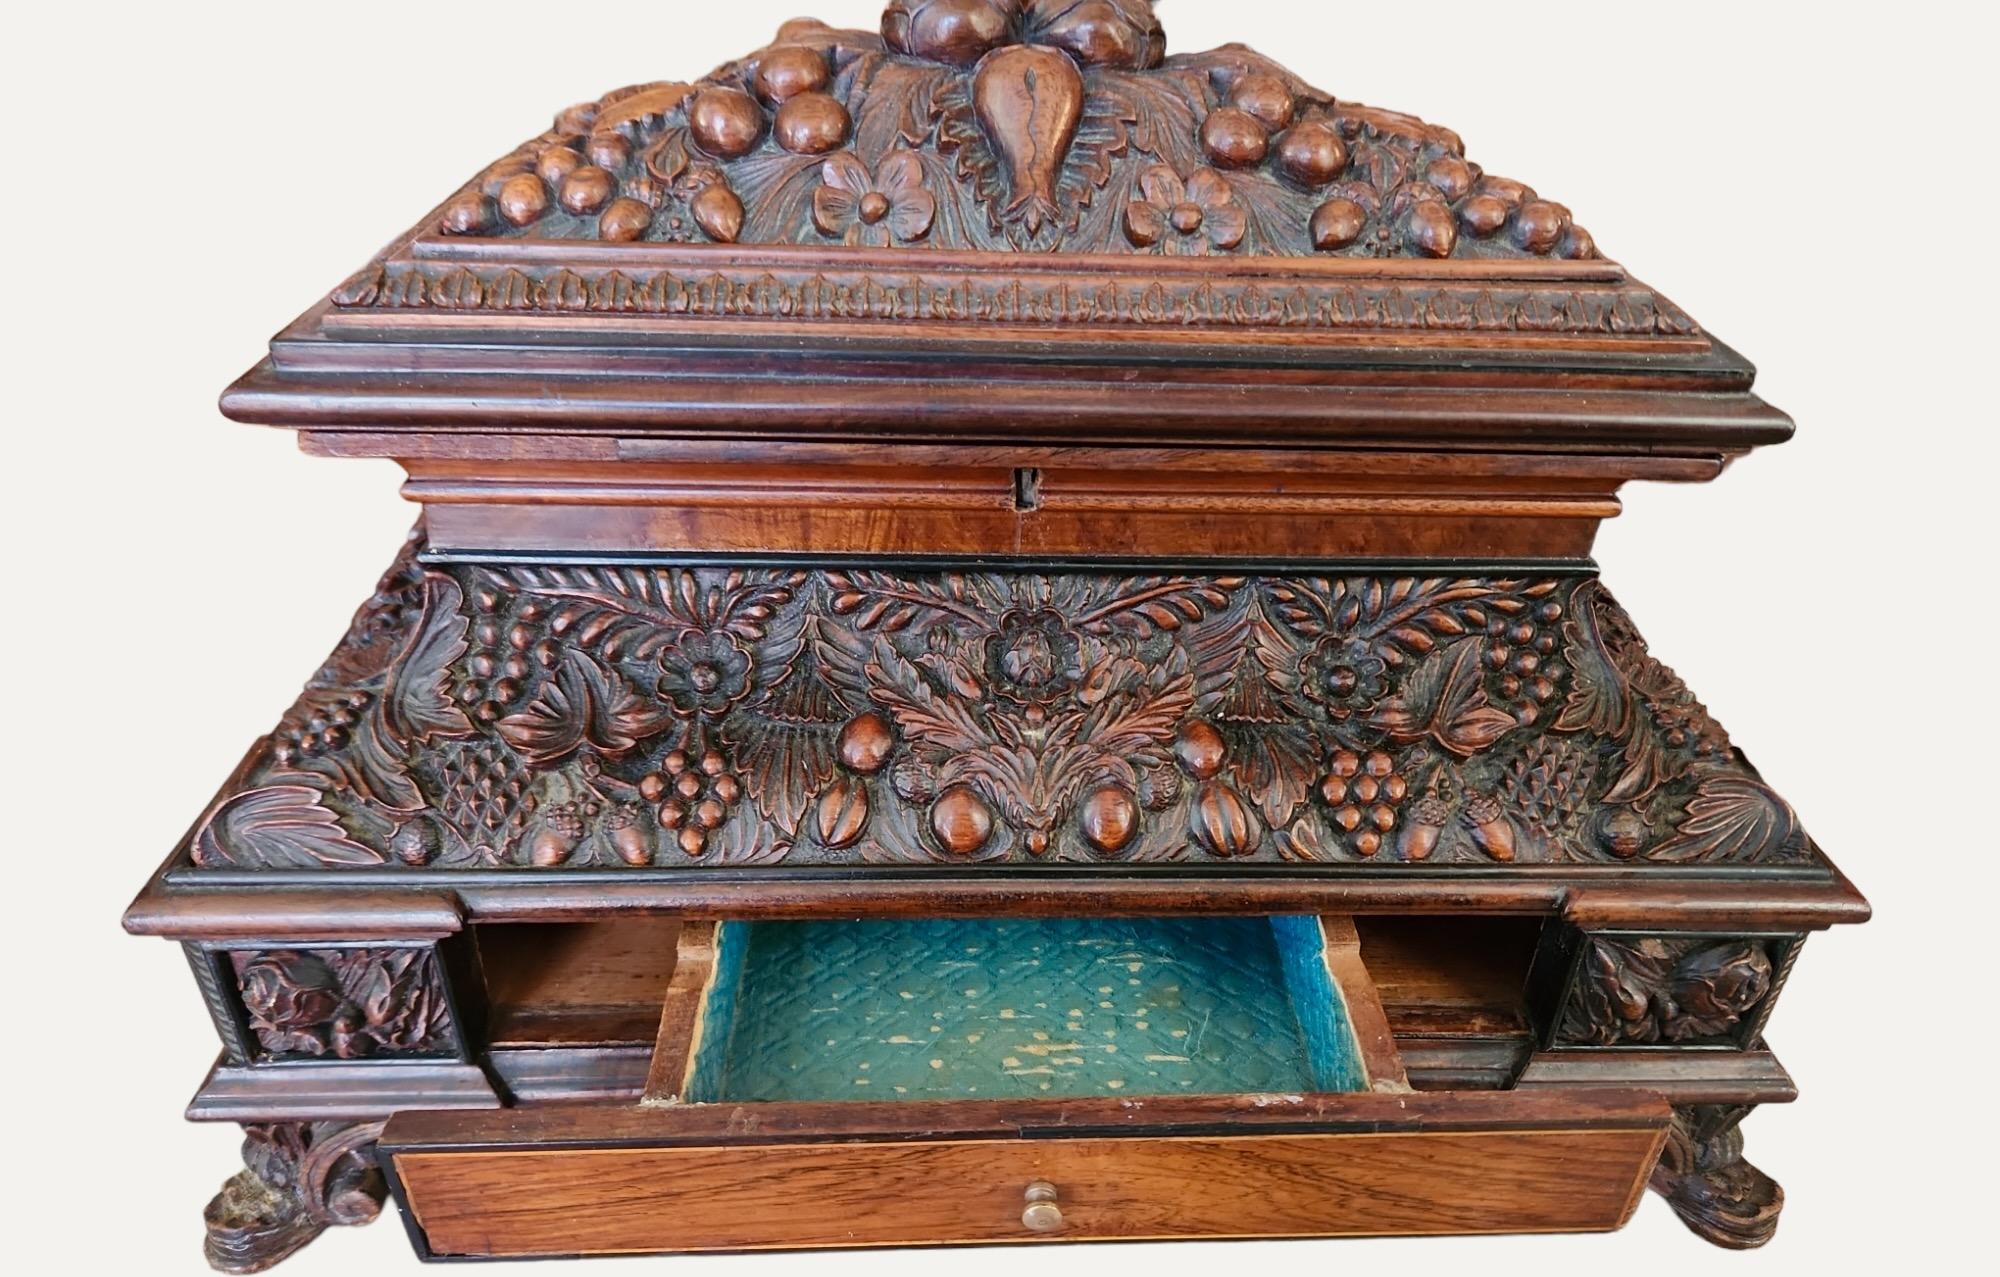 Heavily and finely carved with leaves and fruit,   Has four drawers with inlaid interior.  Could possibly be French.